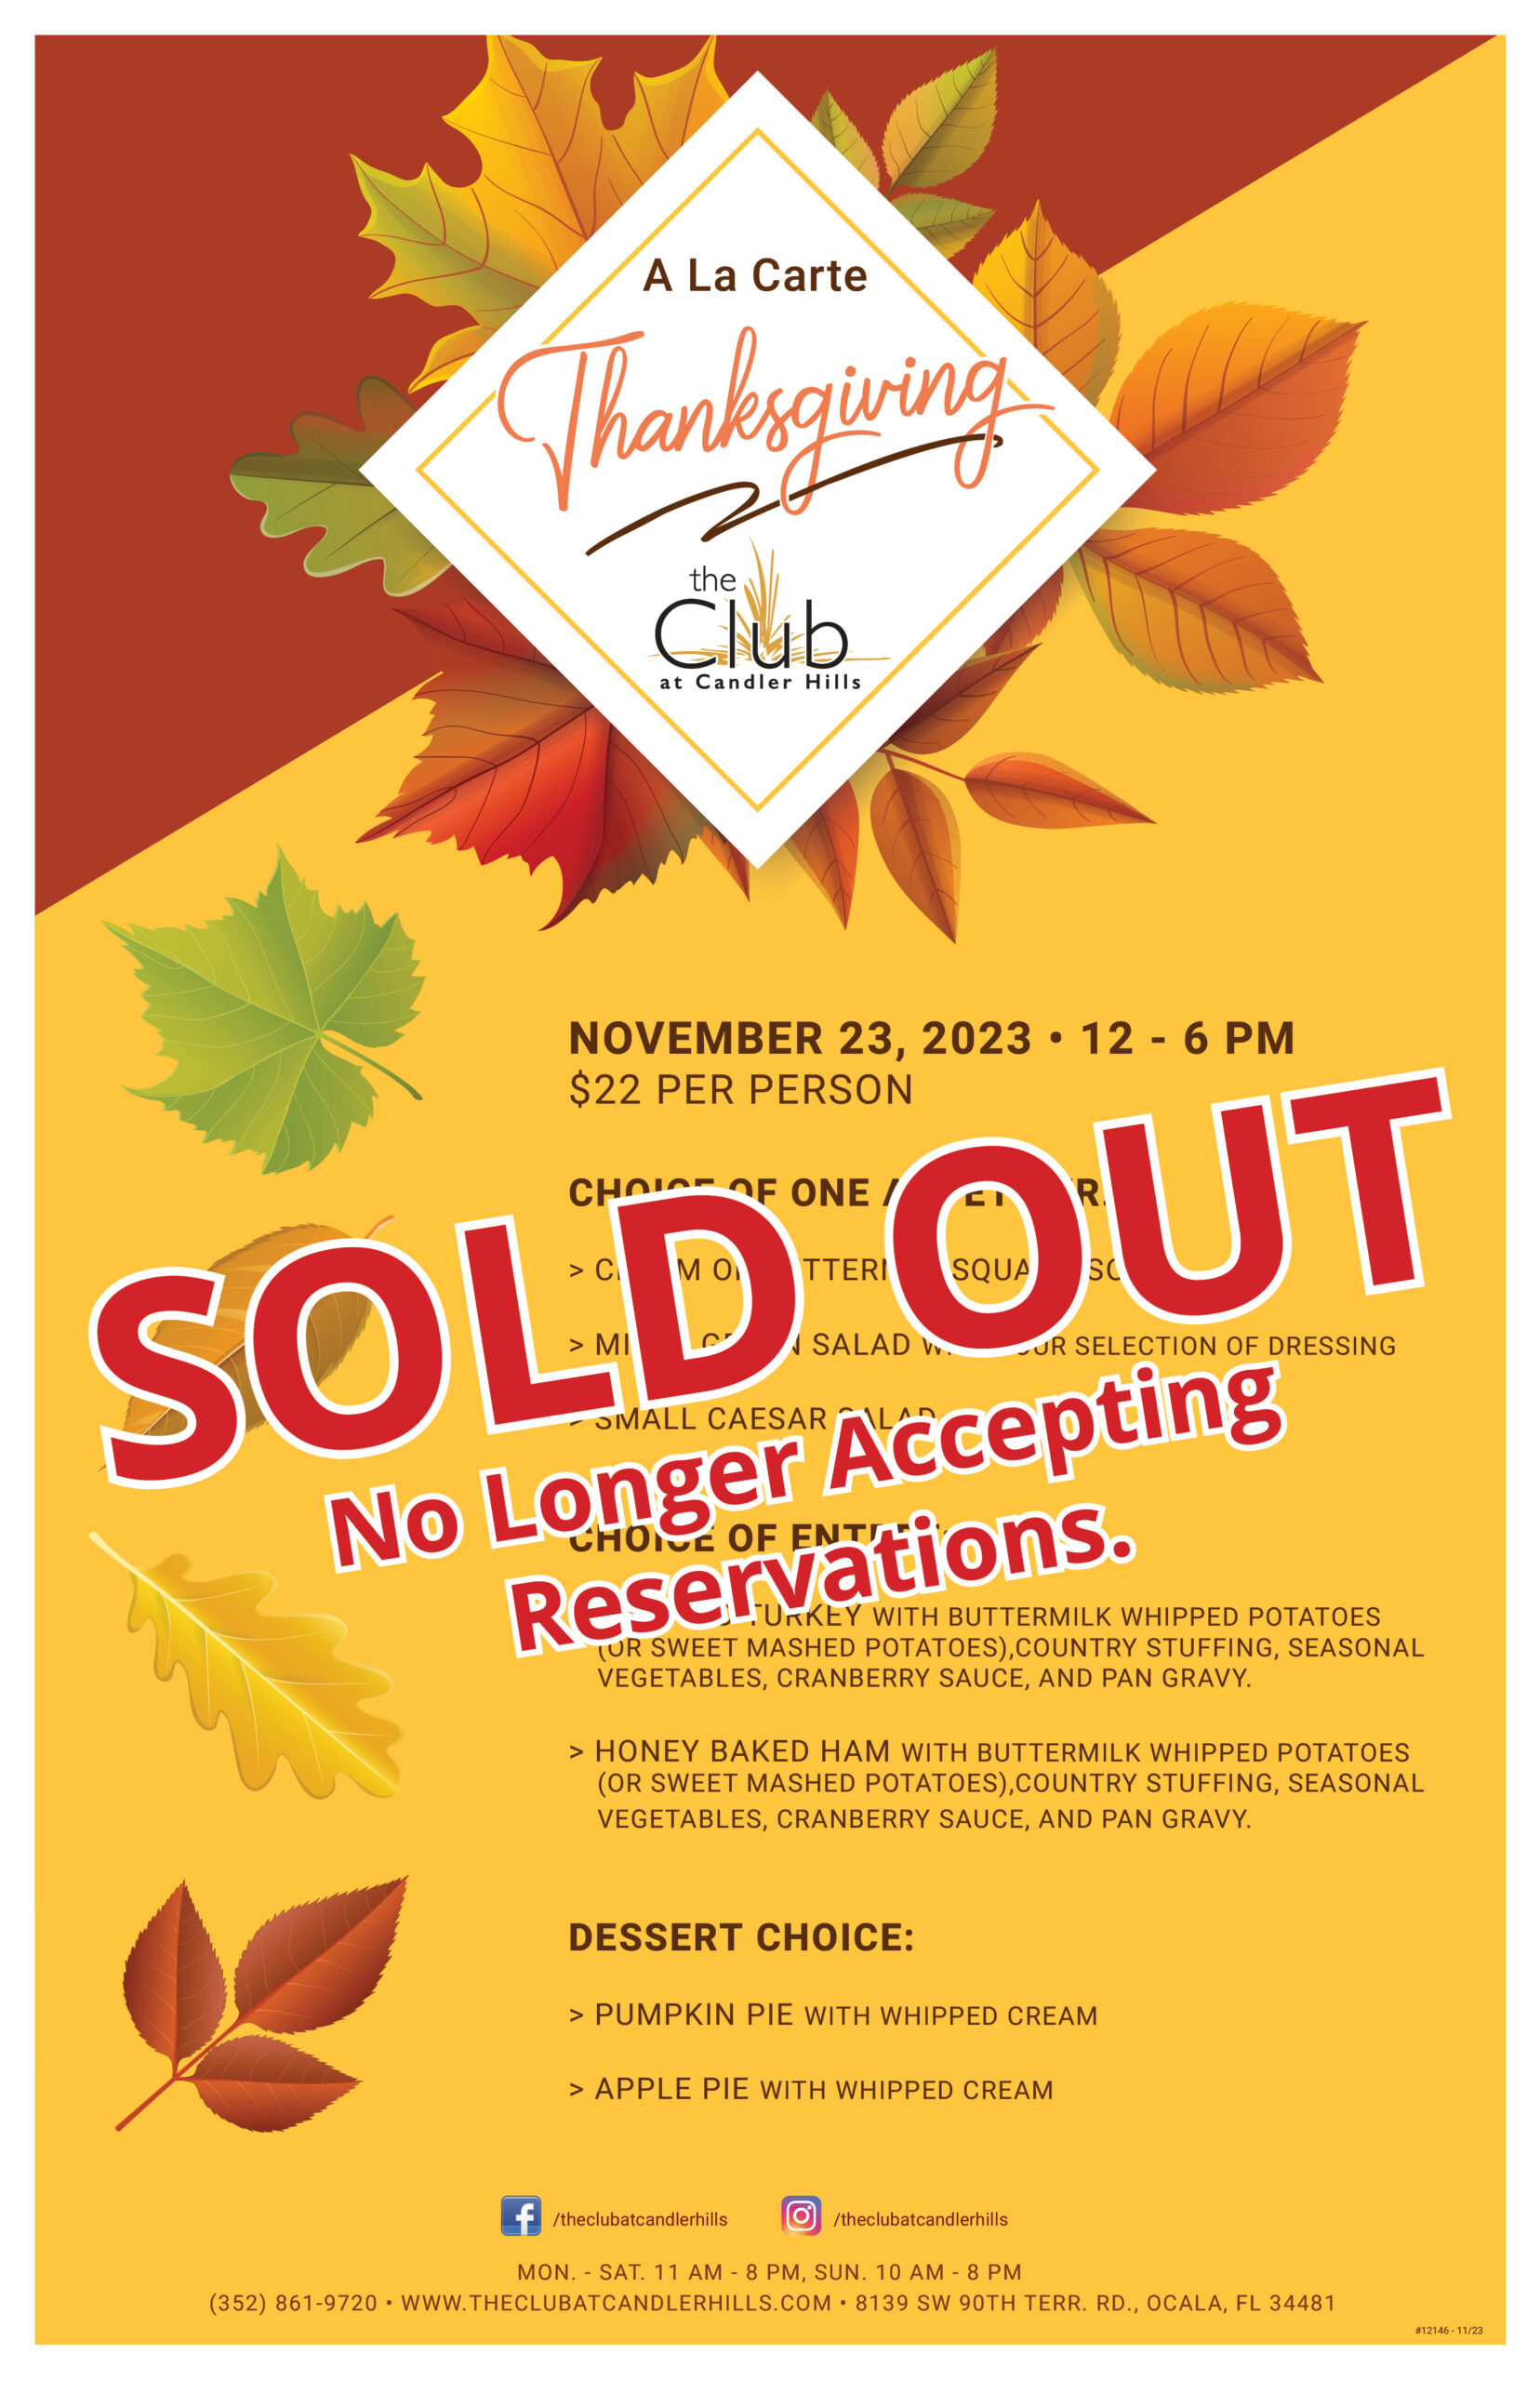 Thanksgiving Buffet is SOLD OUT!